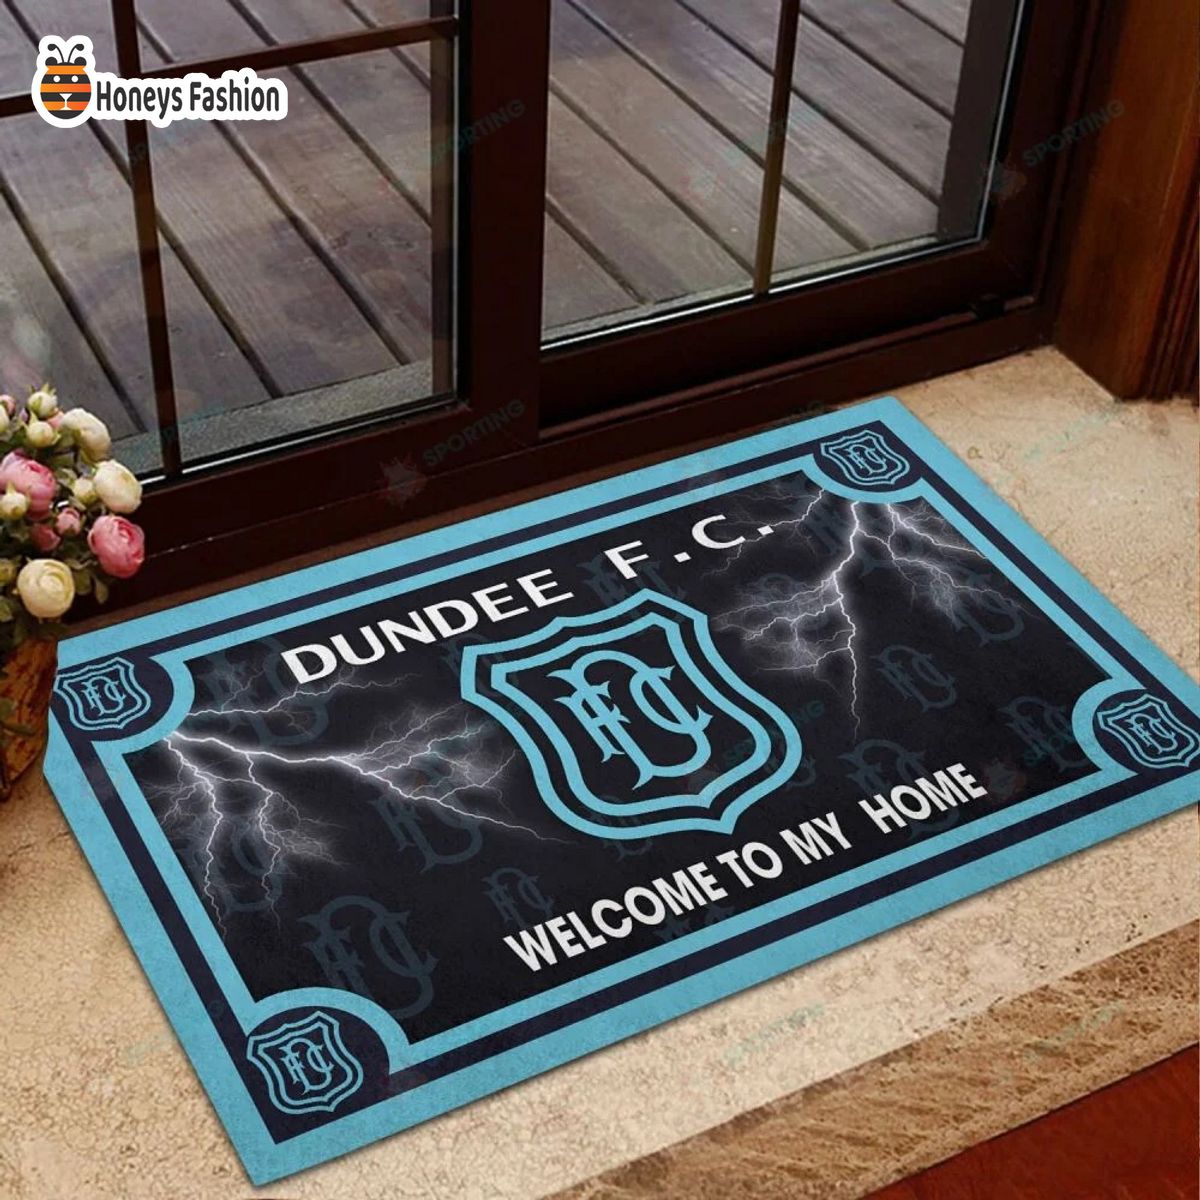 Dundee F.C welcome to my home doormat